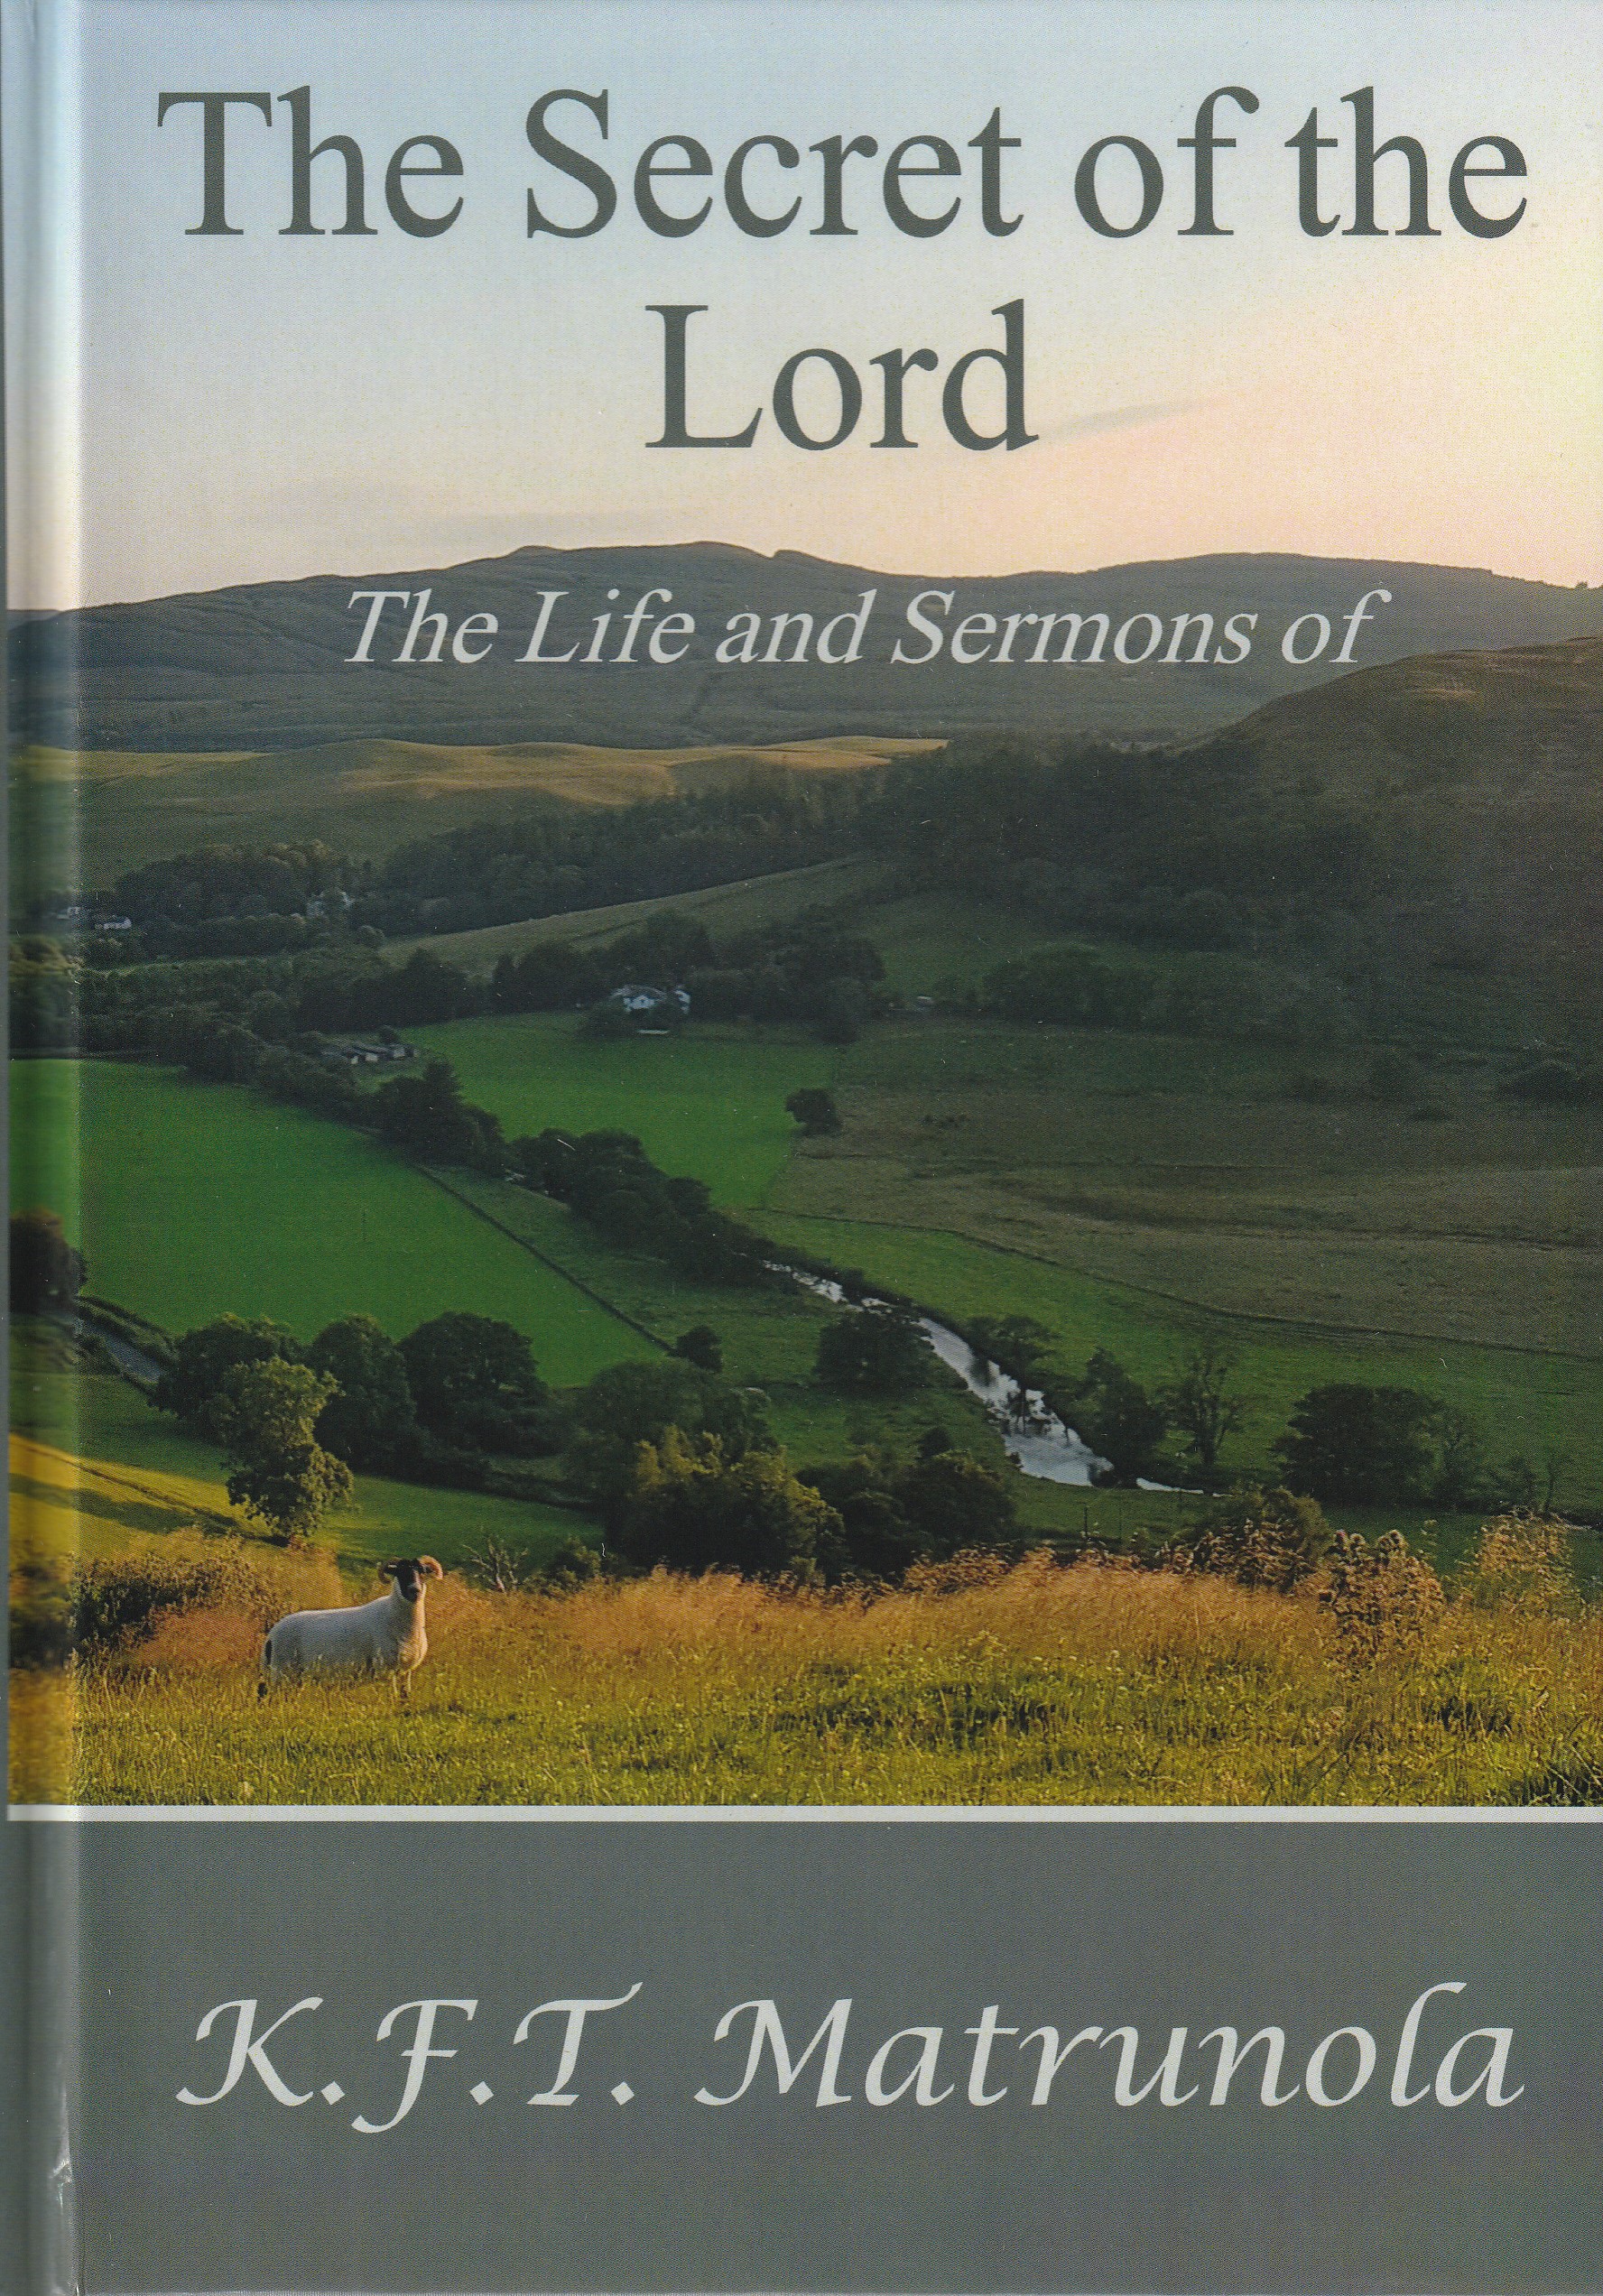 The Secret of the Lord: The Life and Sermons of K.F.T. Matrunola